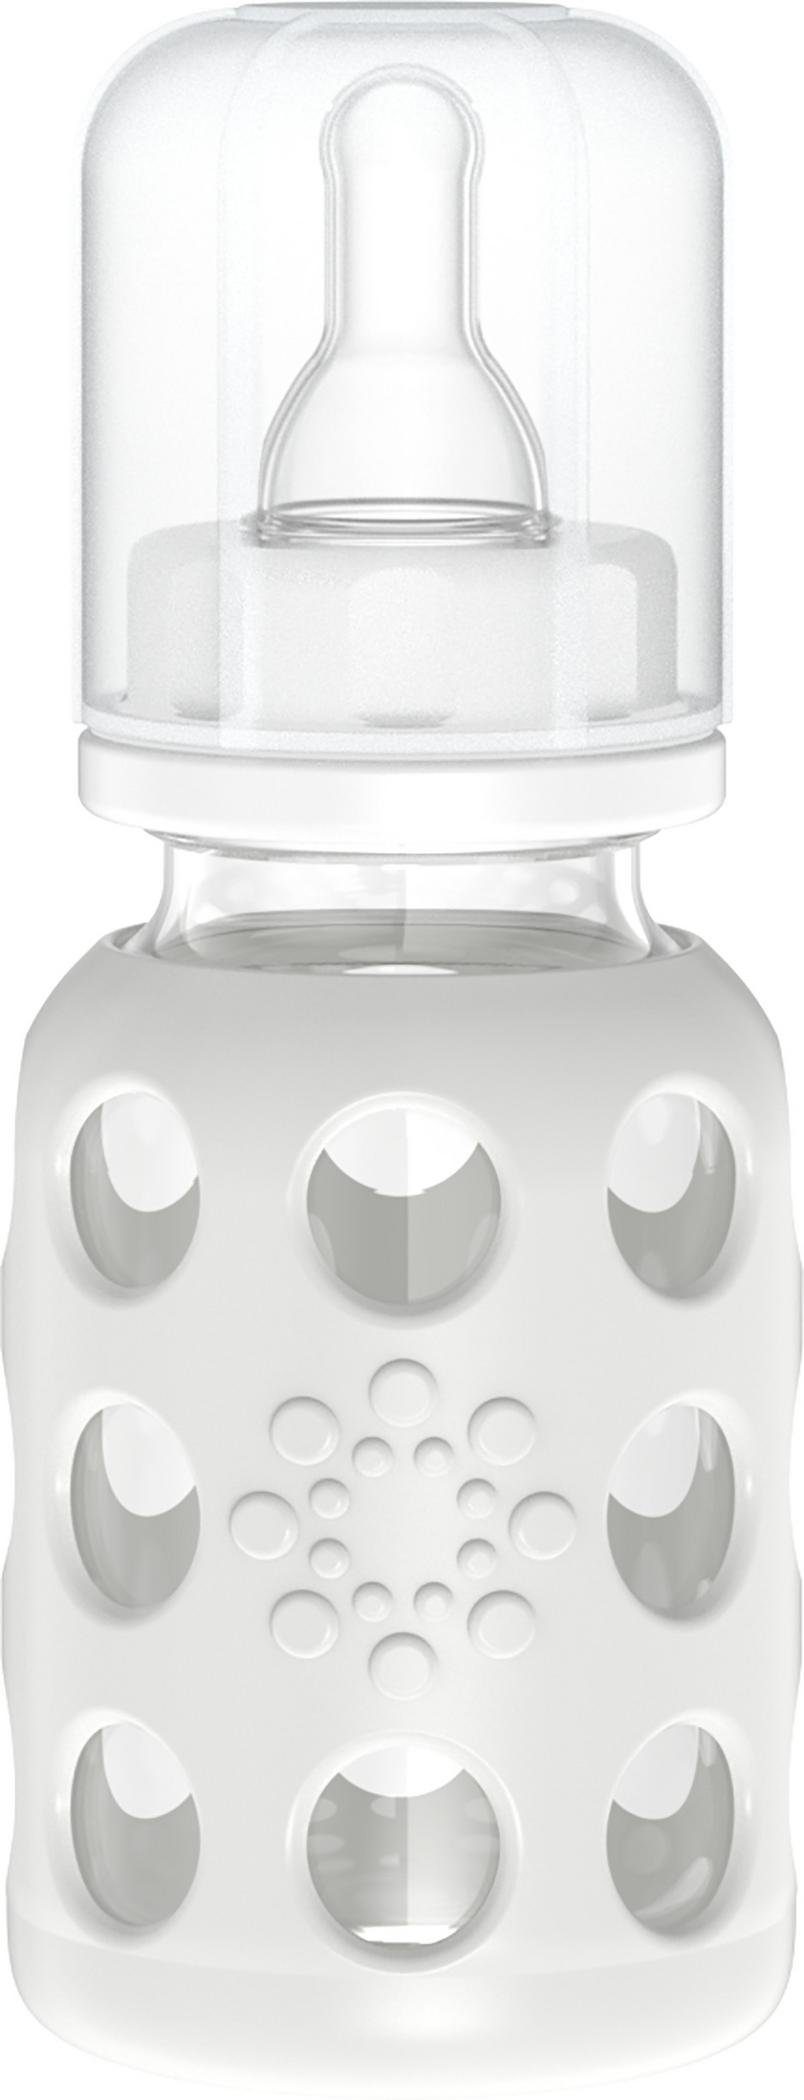 Lifefactory Babyflasche, Glasflasche 120ml, inkl. Silikonsauger Gr. 1 (0-3 Monate) Cool Grey